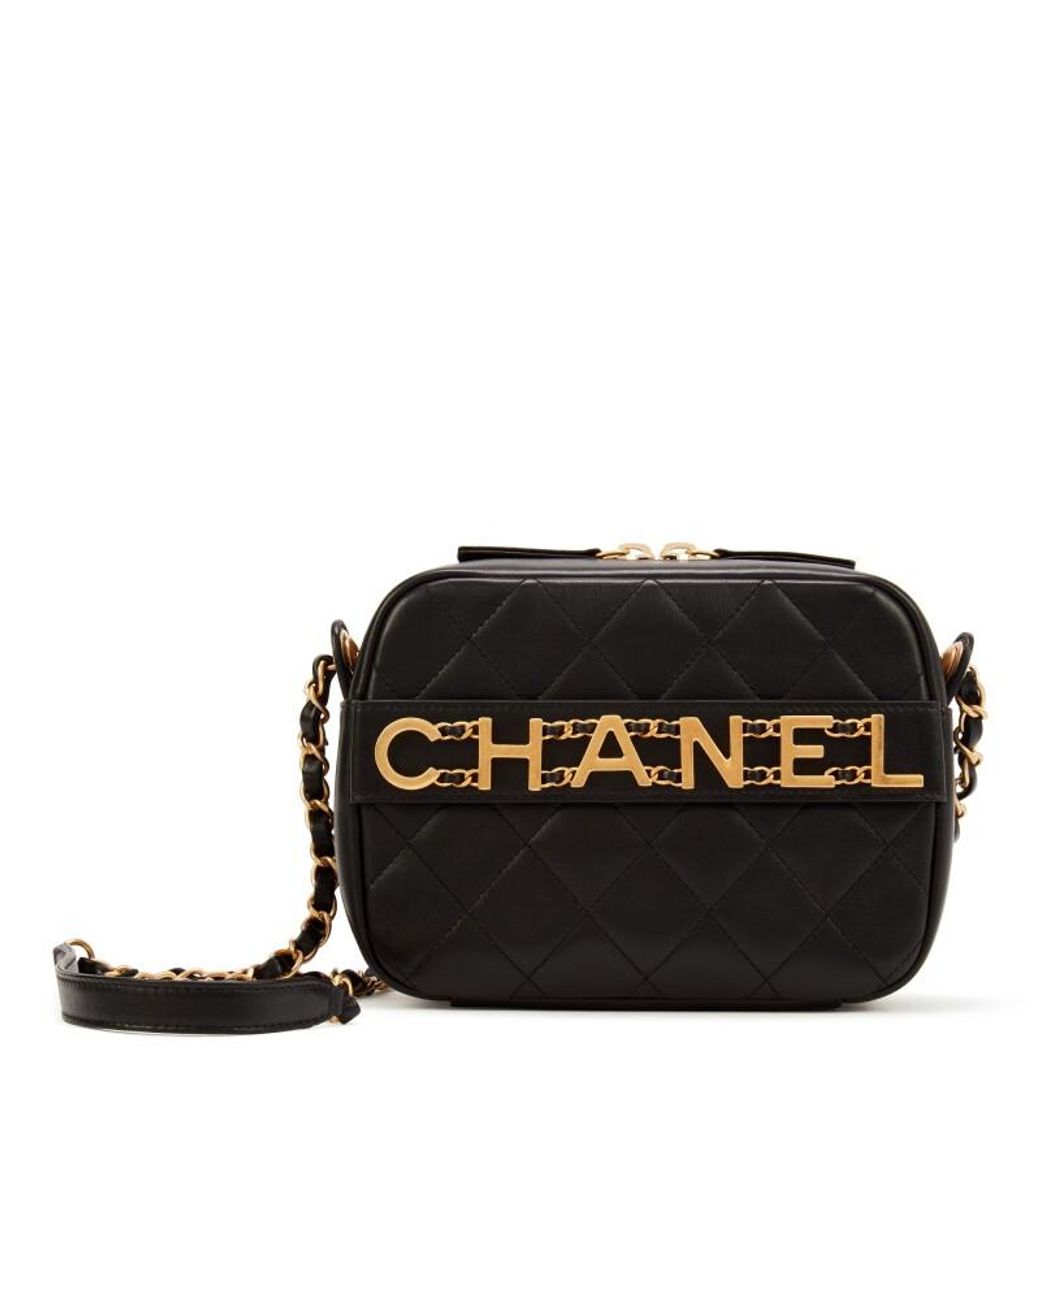 Chanel Enchained Camera Matte Bag in Black